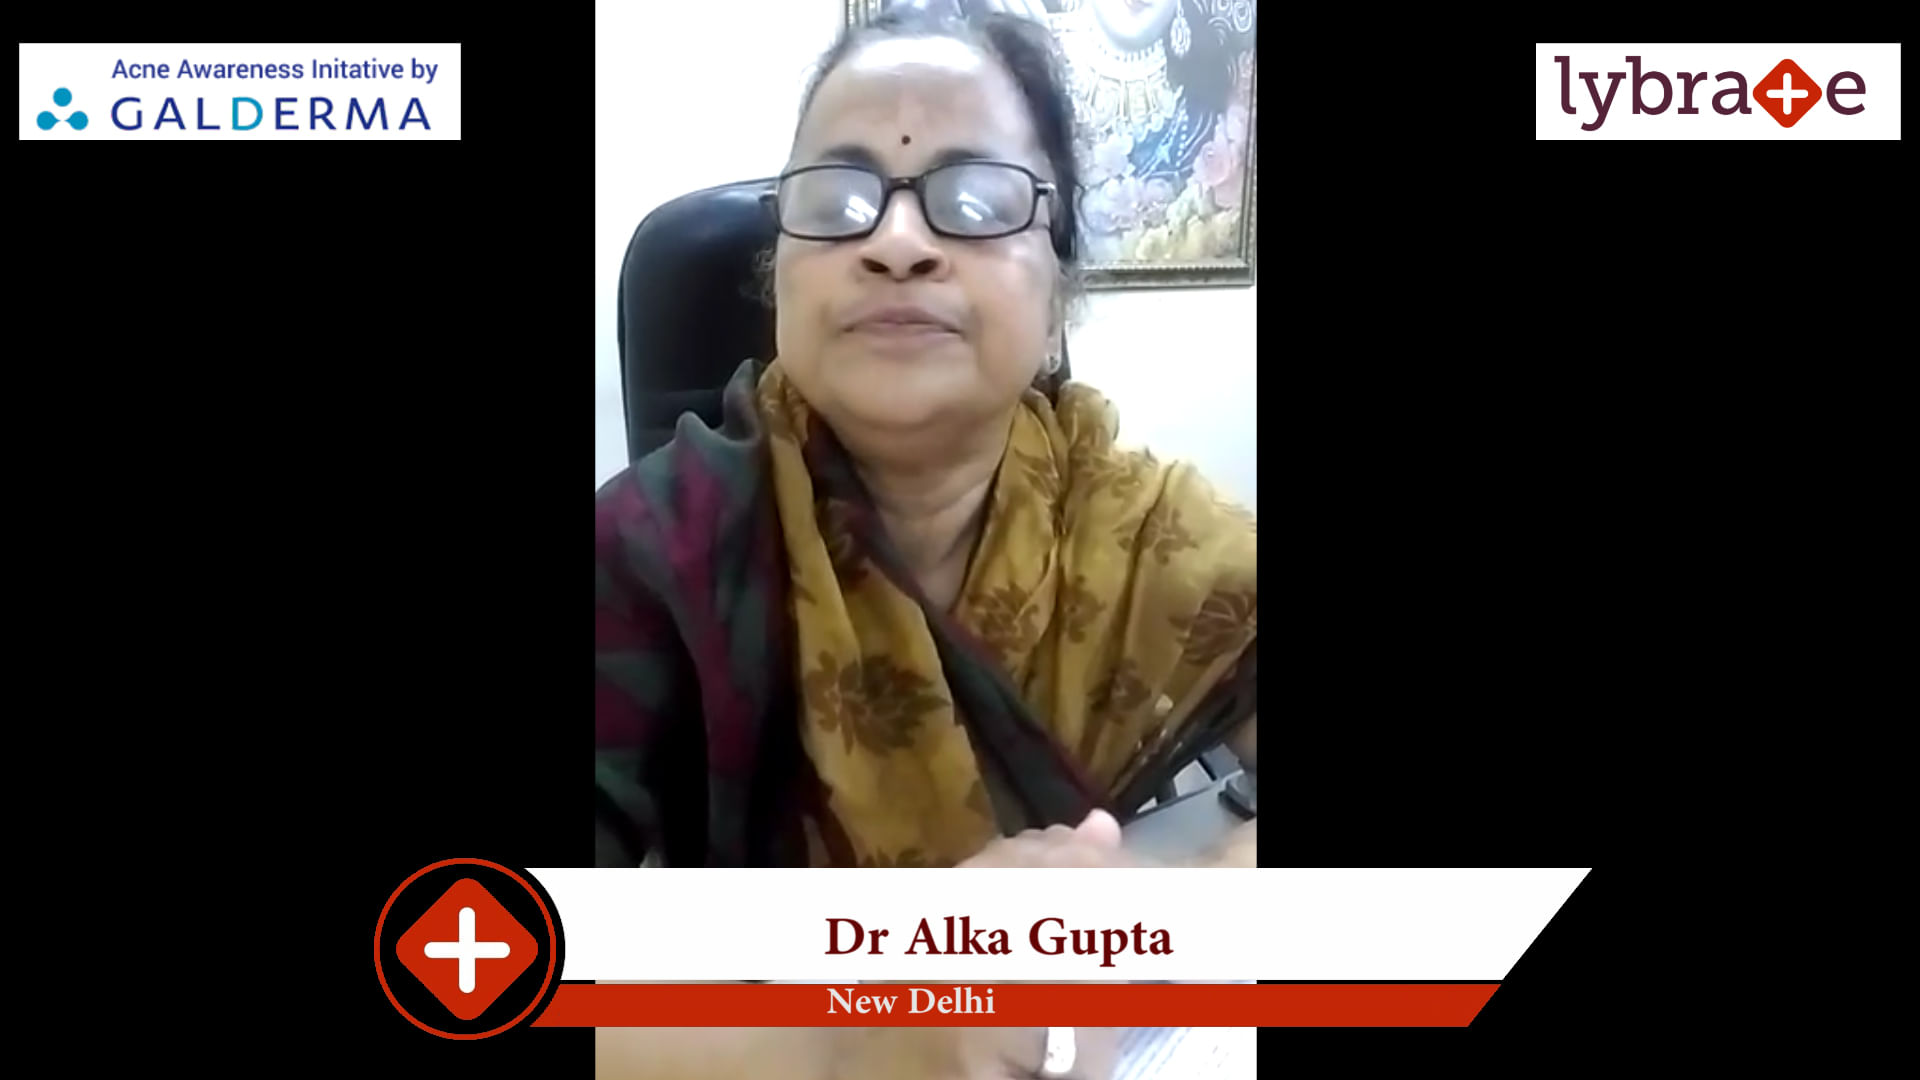 Lybrate | Dr. Alka Gupta speaks on IMPORTANCE OF TREATING ACNE EARLY